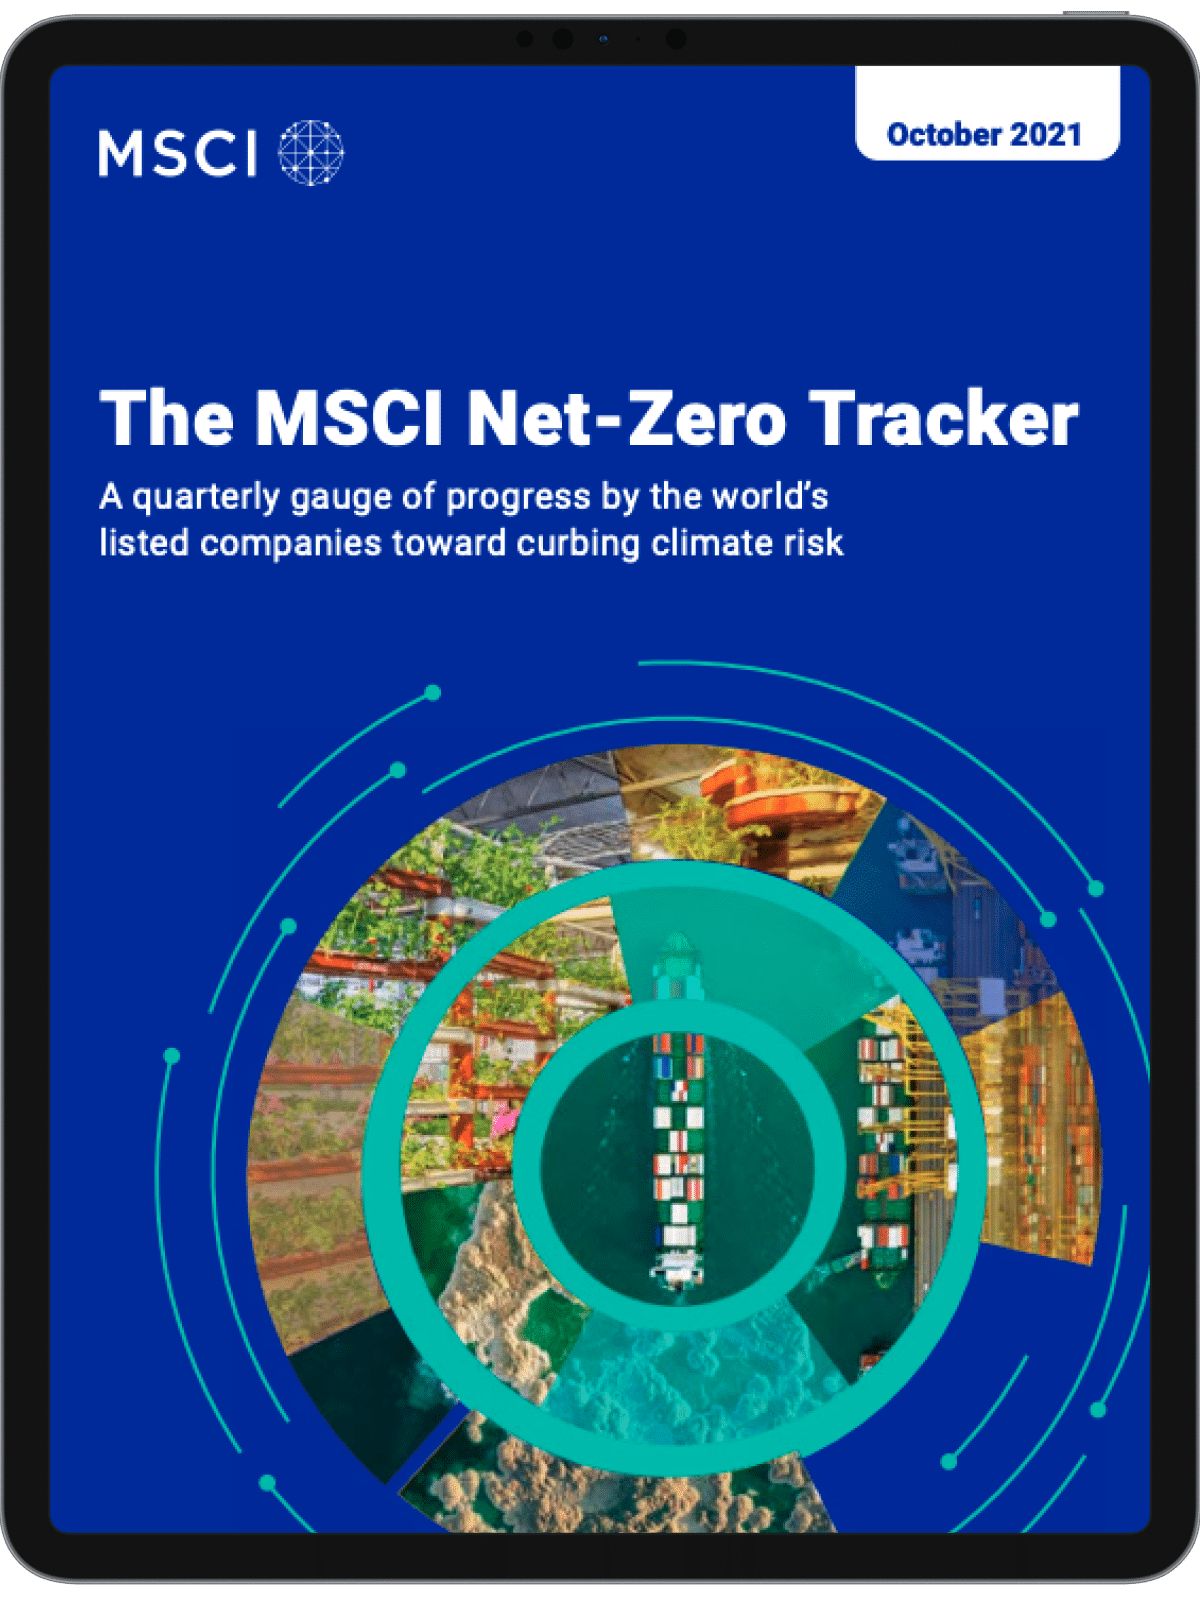 A tablet mockup of the MSCI global report.